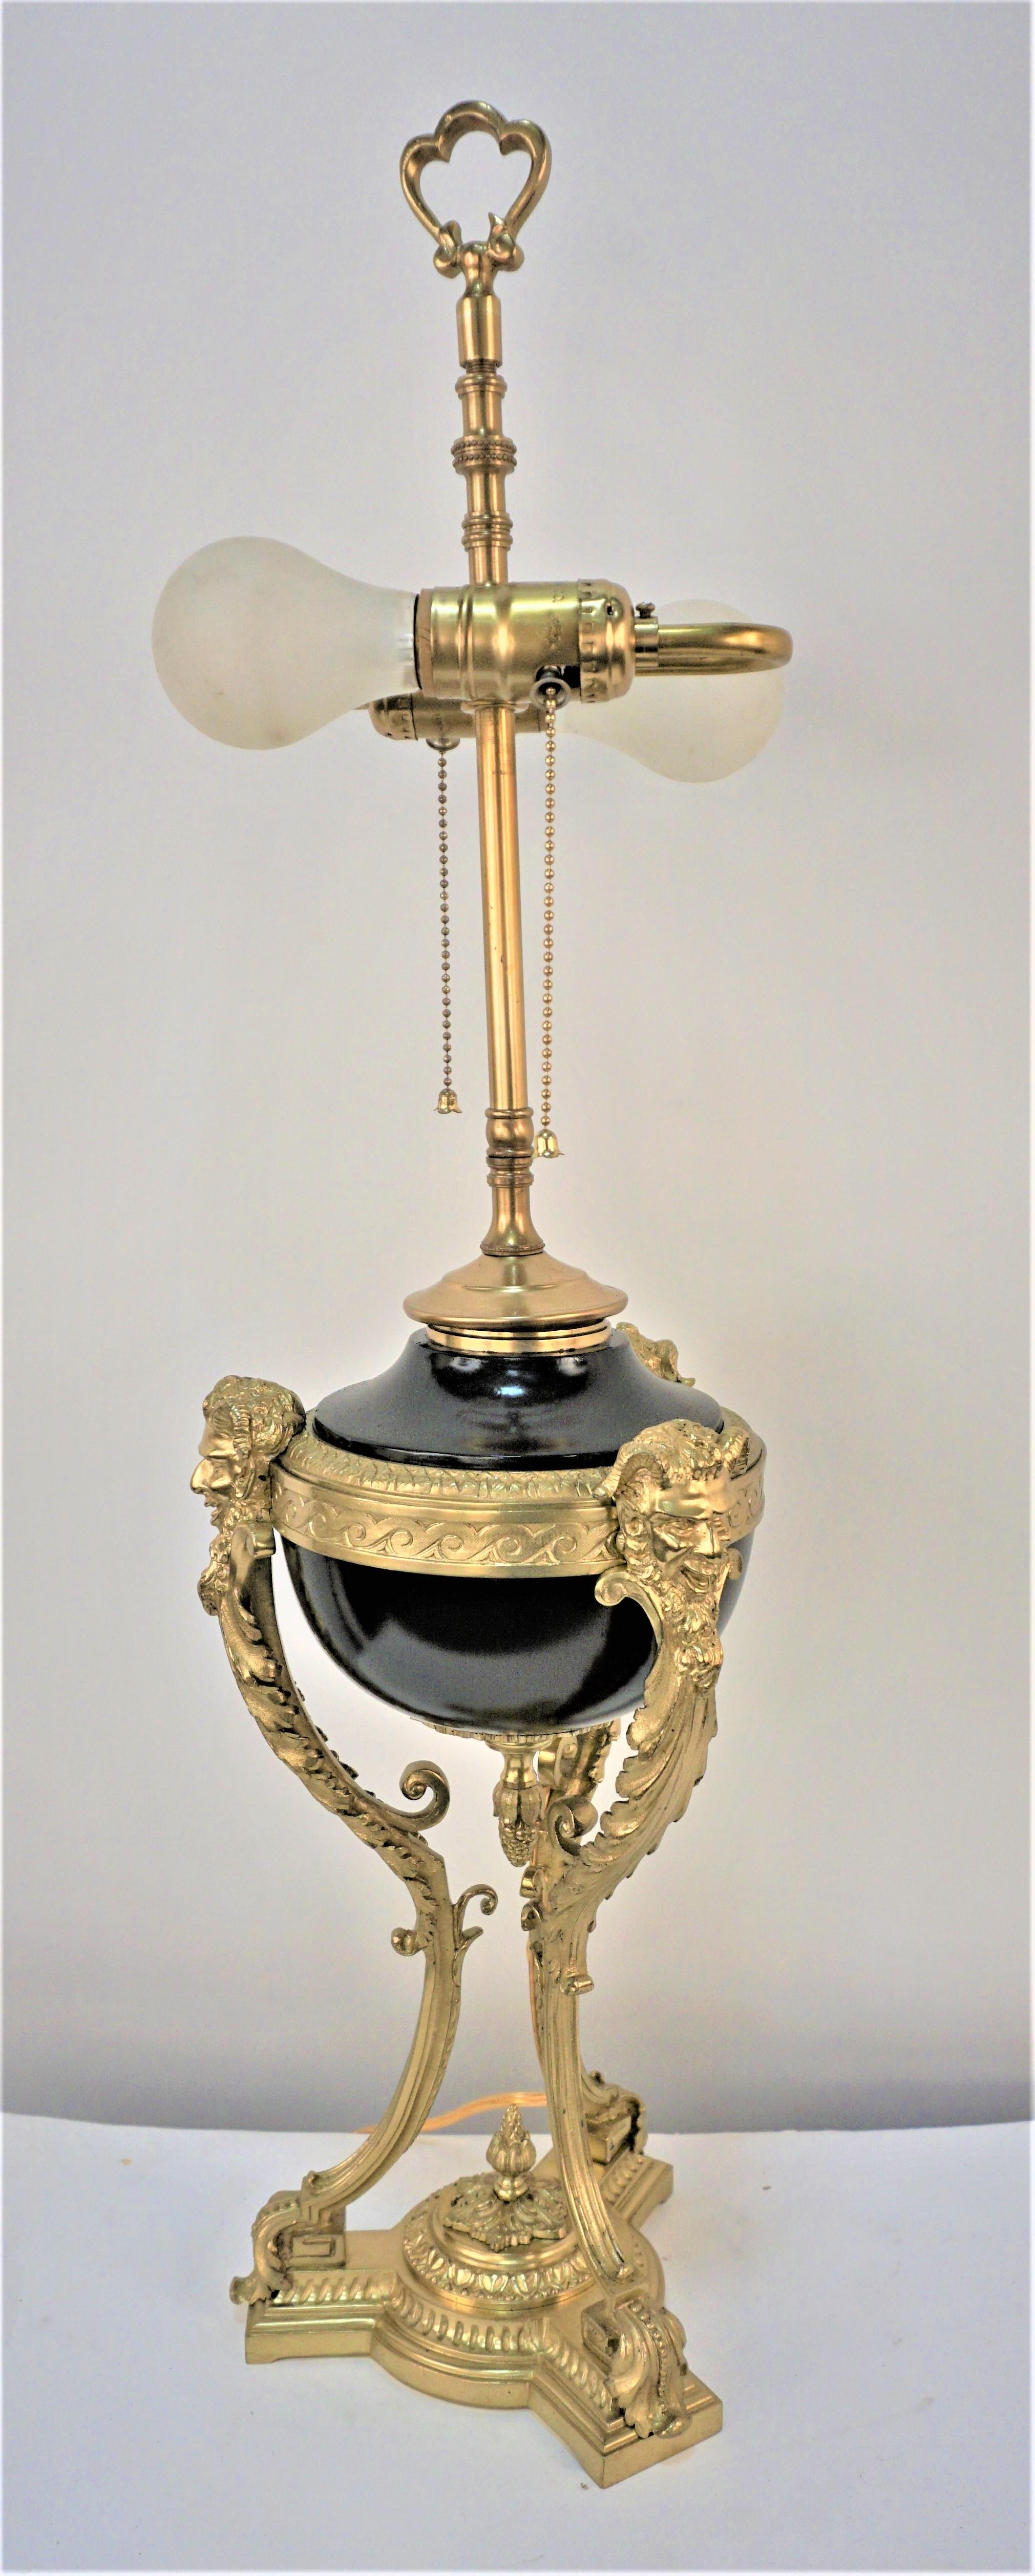 Bronze empire oil lamp has professionally rewired with double pull chain socket and fitted with hardback lampshade.
Measurement includes the lampshade.